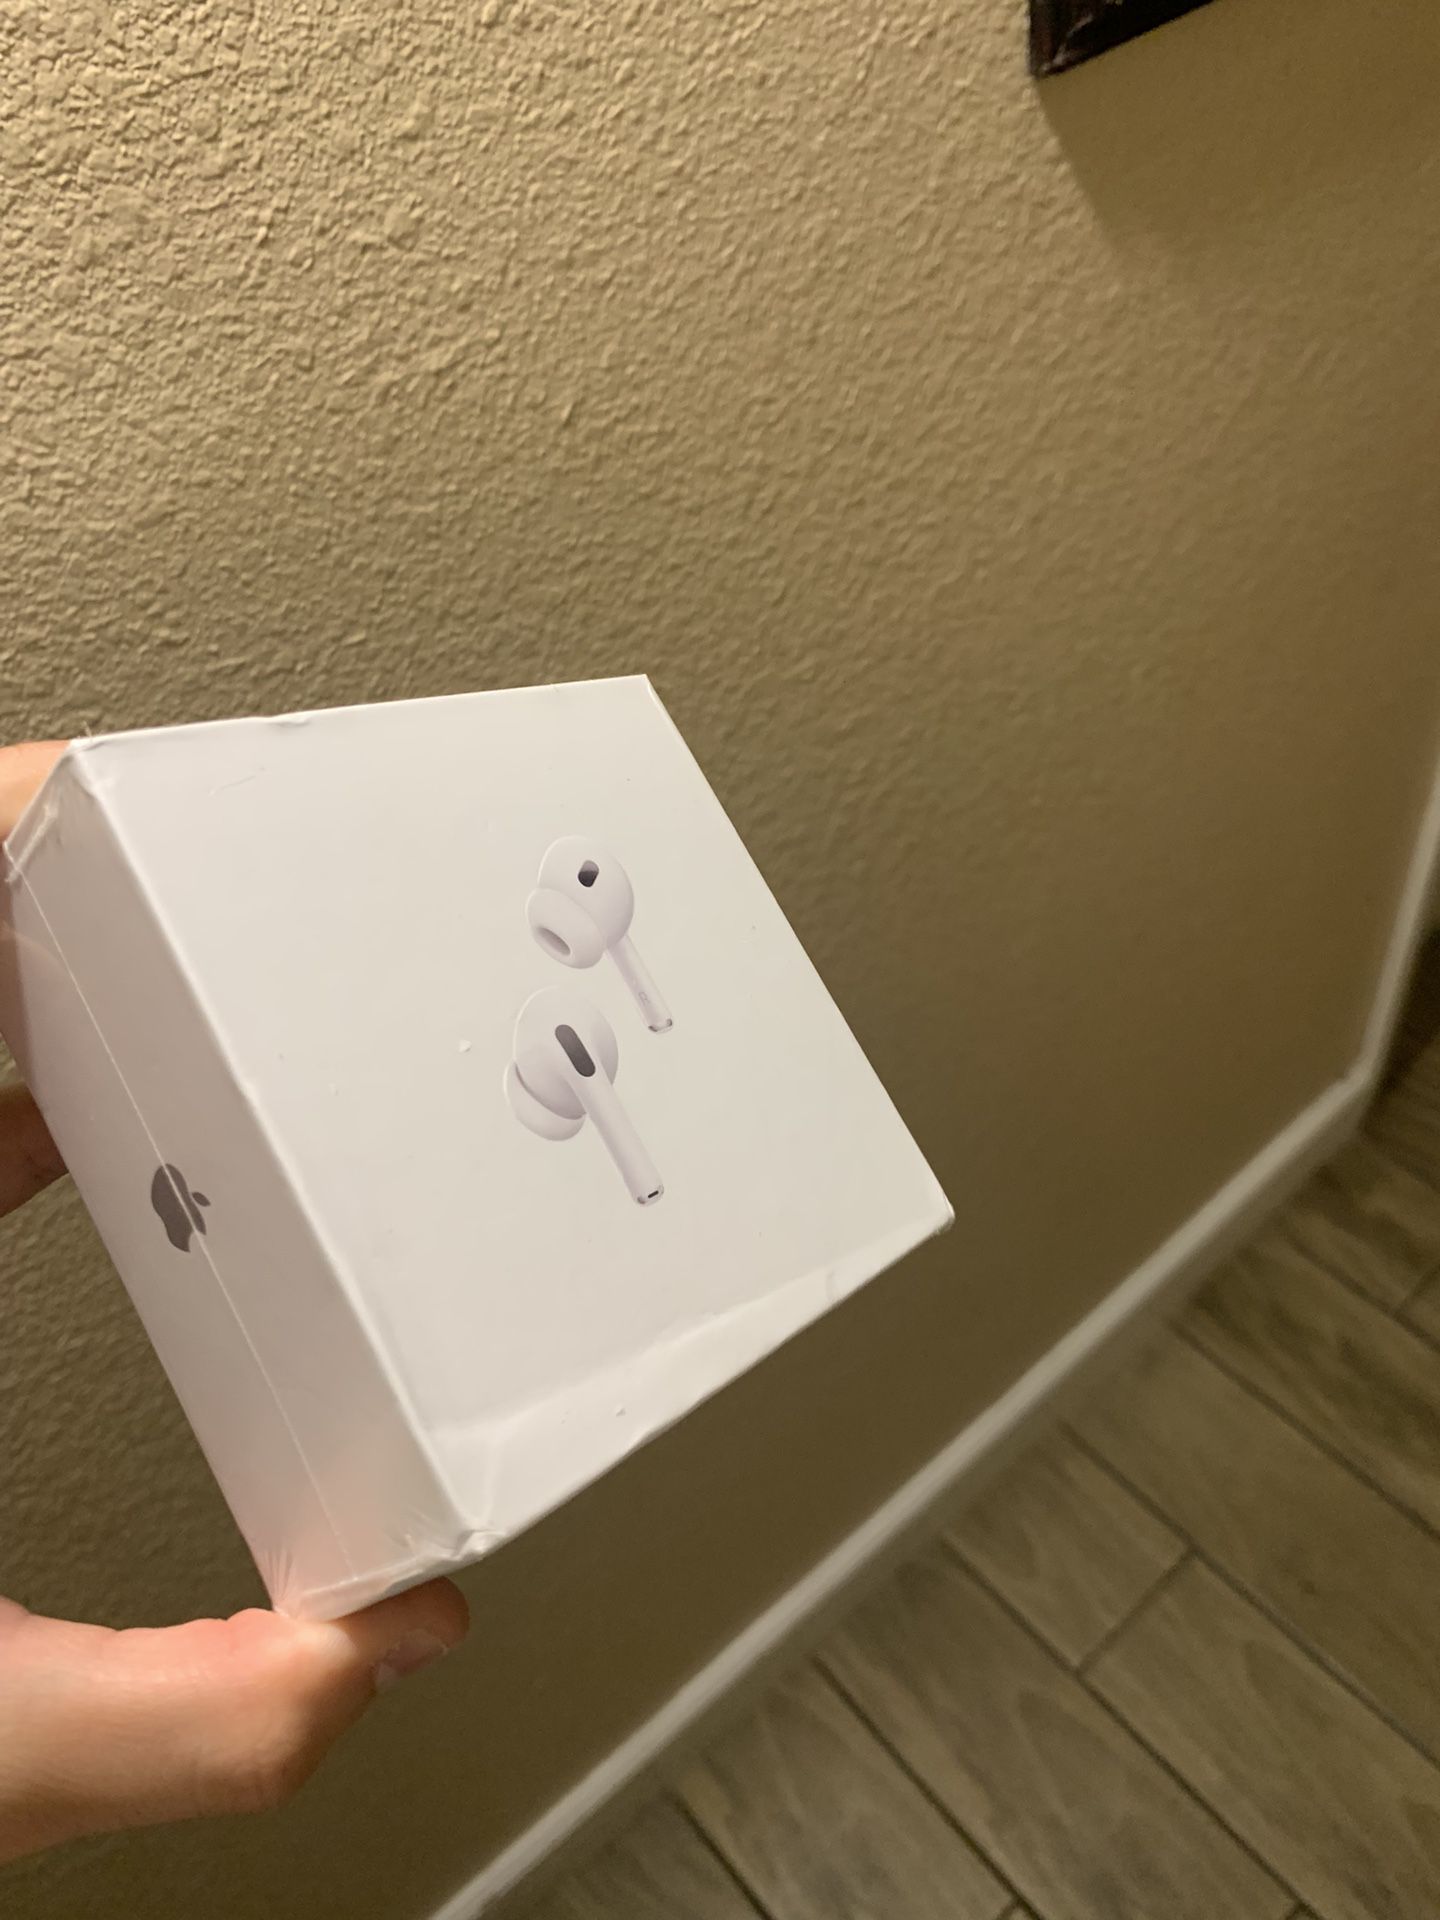 AirPods Pros “2nd Generation” 